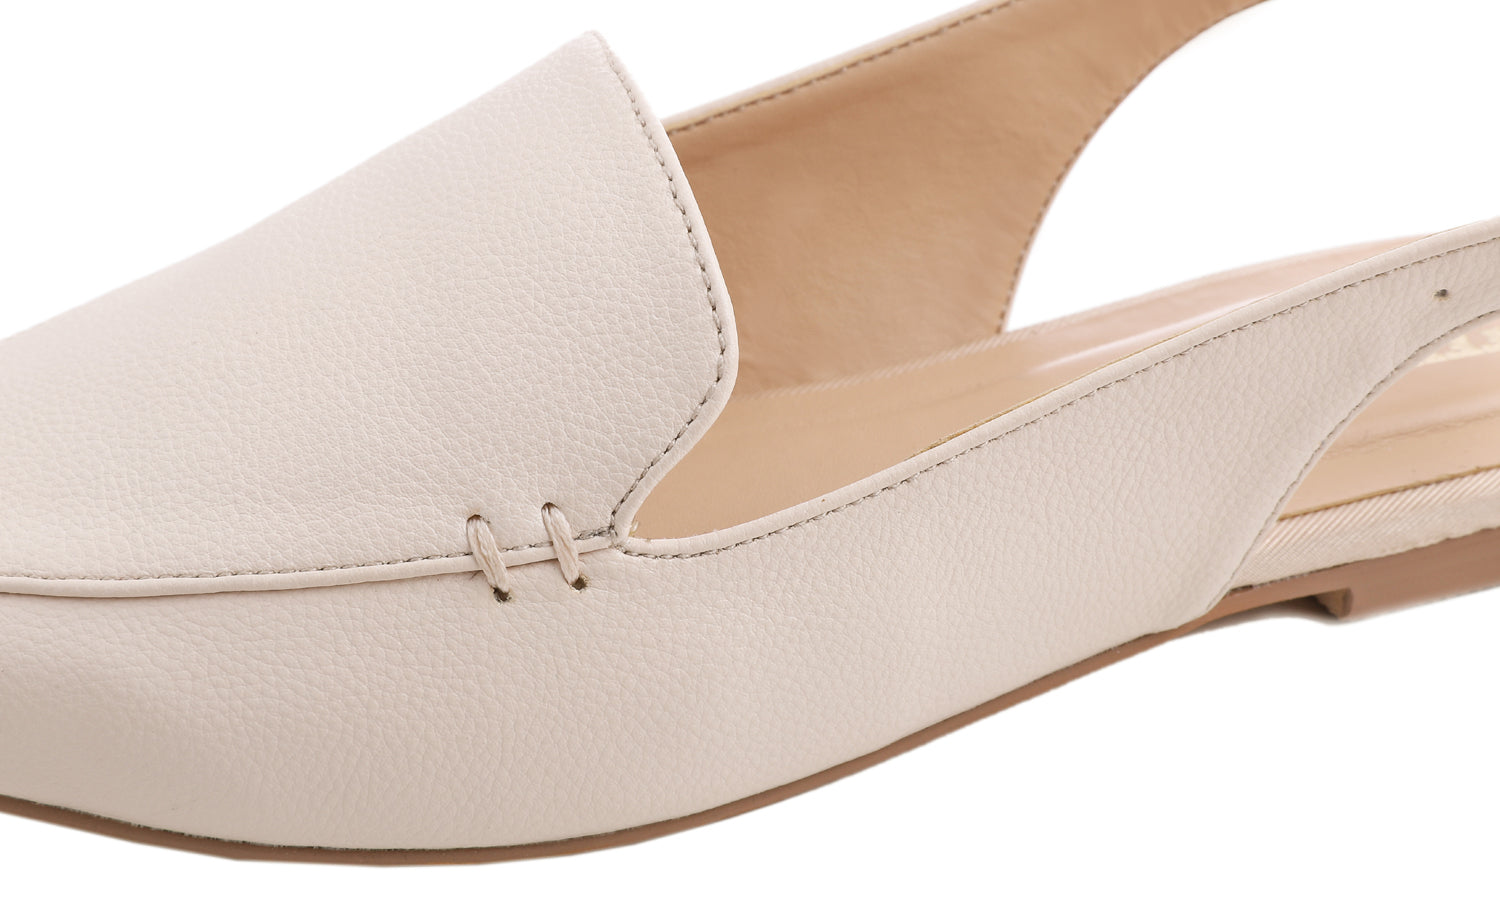 Feversole Pointed Toe Casual Slingback Flat Mules Women's Beige Vegan Leather Summer Slippers